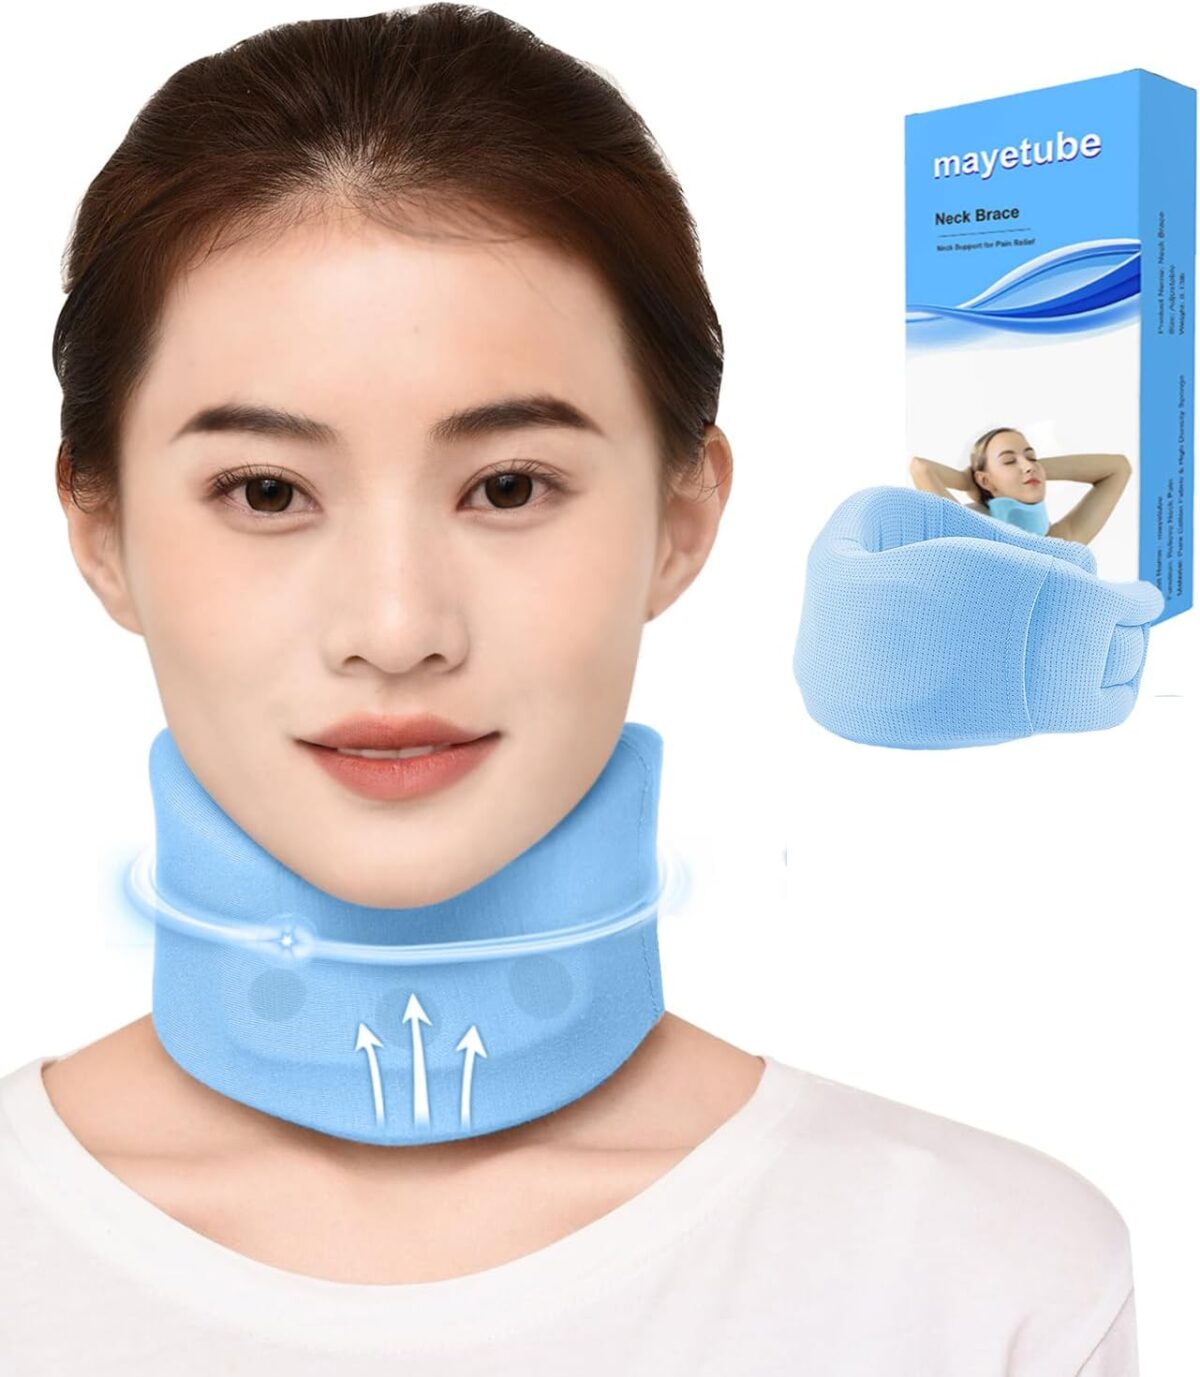 Featured Image for Neck Brace Soft Cervical Collar,Foam Neck Stretcher for Pain Relief,Neck Support After Whiplash or Injury Adjustable Neck Collar for Sleeping Universal Neck Braces for Women&Men (Small-15.7″x2.95″)